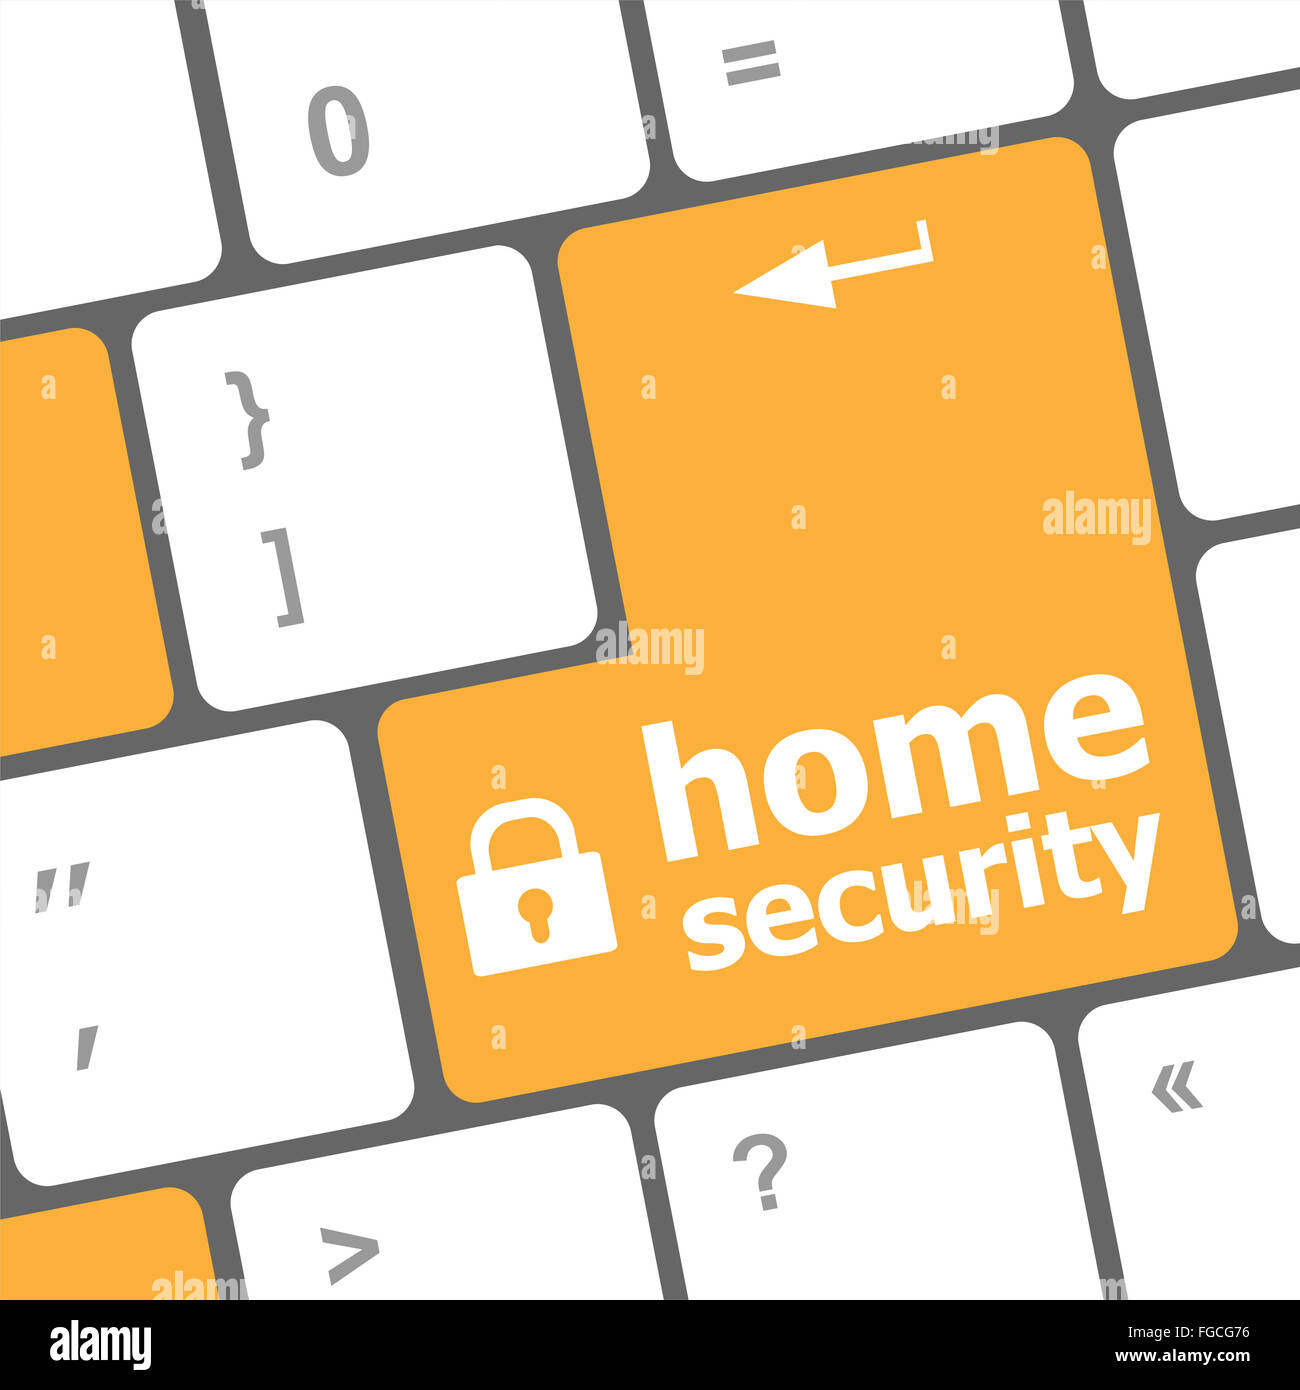 Safety concept: computer keyboard with Home security icon on enter button background Stock Photo